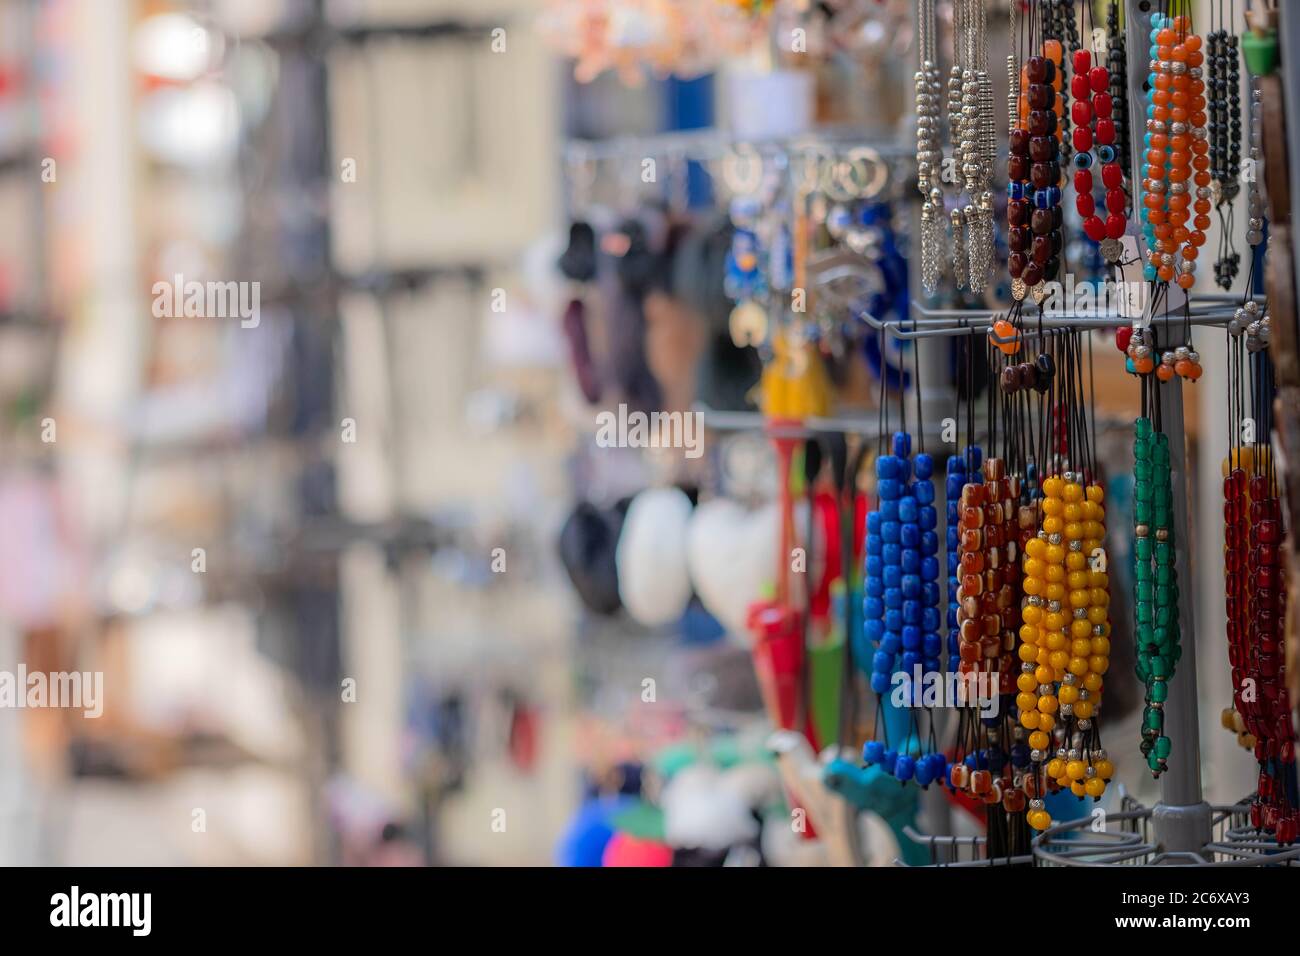 Worry beads or kompoloi, bead collection is a string of beads manipulated with one or two hands and used to pass time in Greek and Cypriot culture. Stock Photo